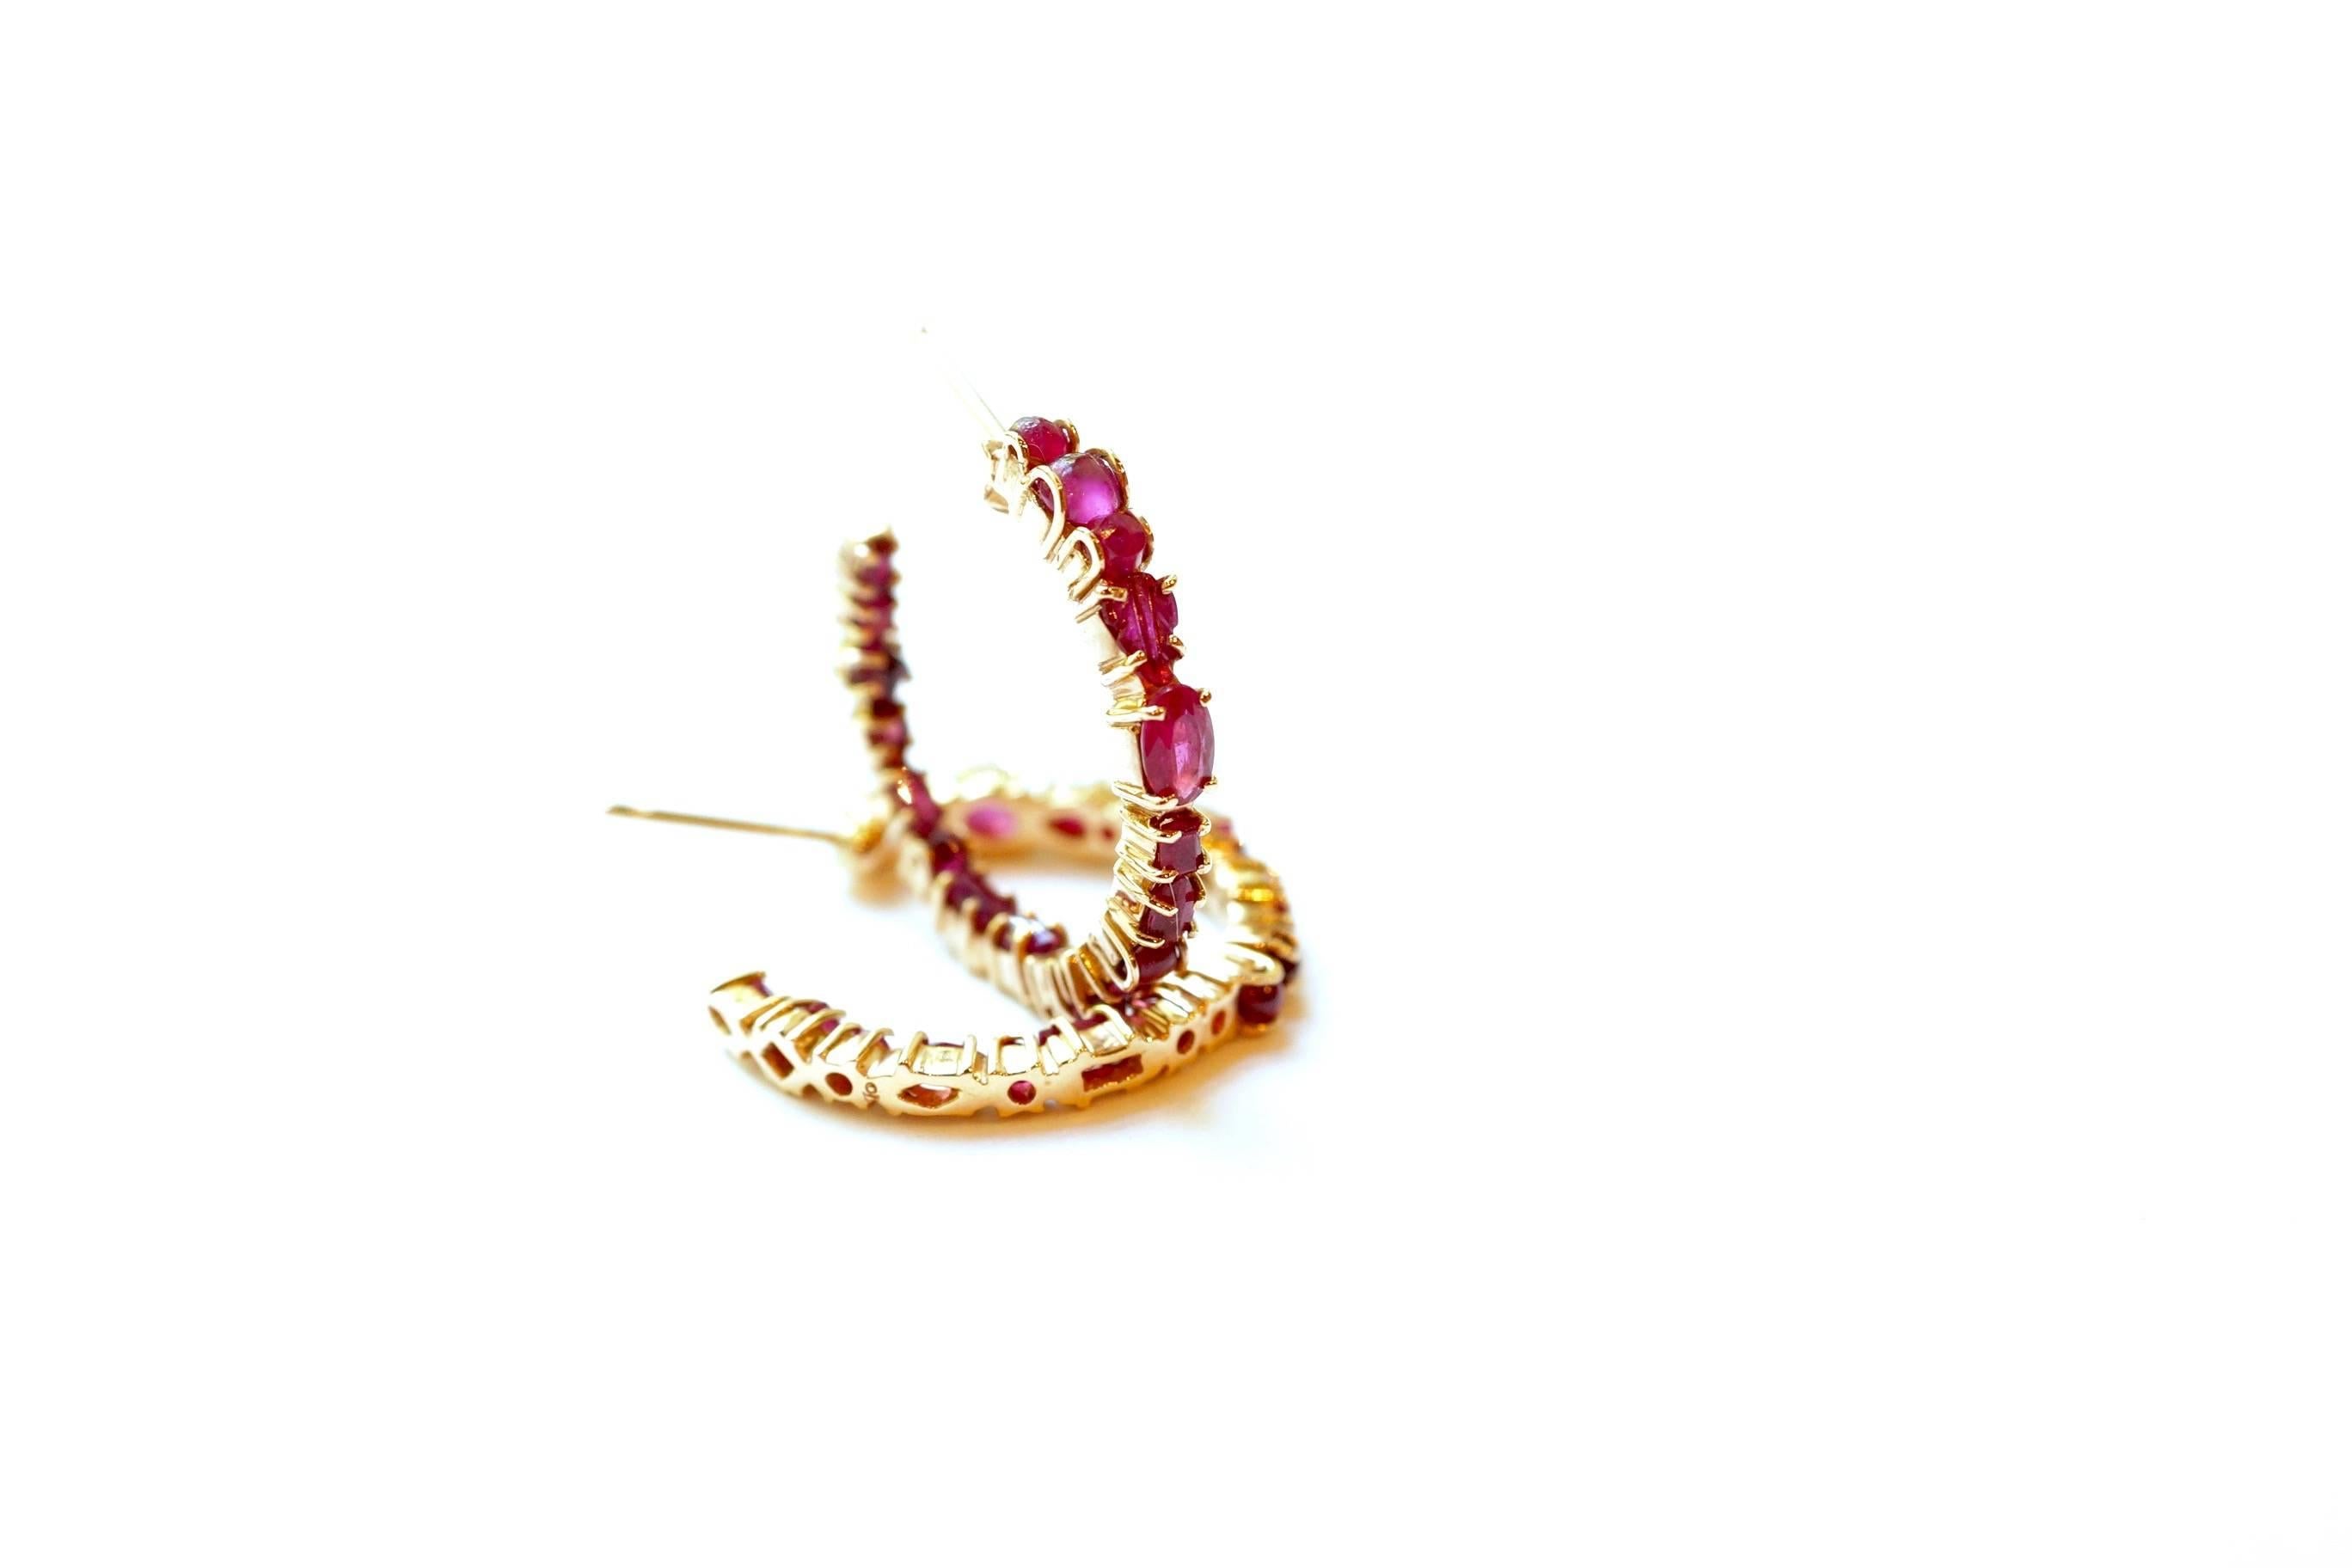 Baby Hoop Earrings
A pair of eighteen-karat rose gold hoop earrings set with a mélange of different shades and cuts of rubies.
Gemstone Total Weight – 3.67 cts.
1-inch diameter
This piece, in its entirety, has been created and handcrafted in New